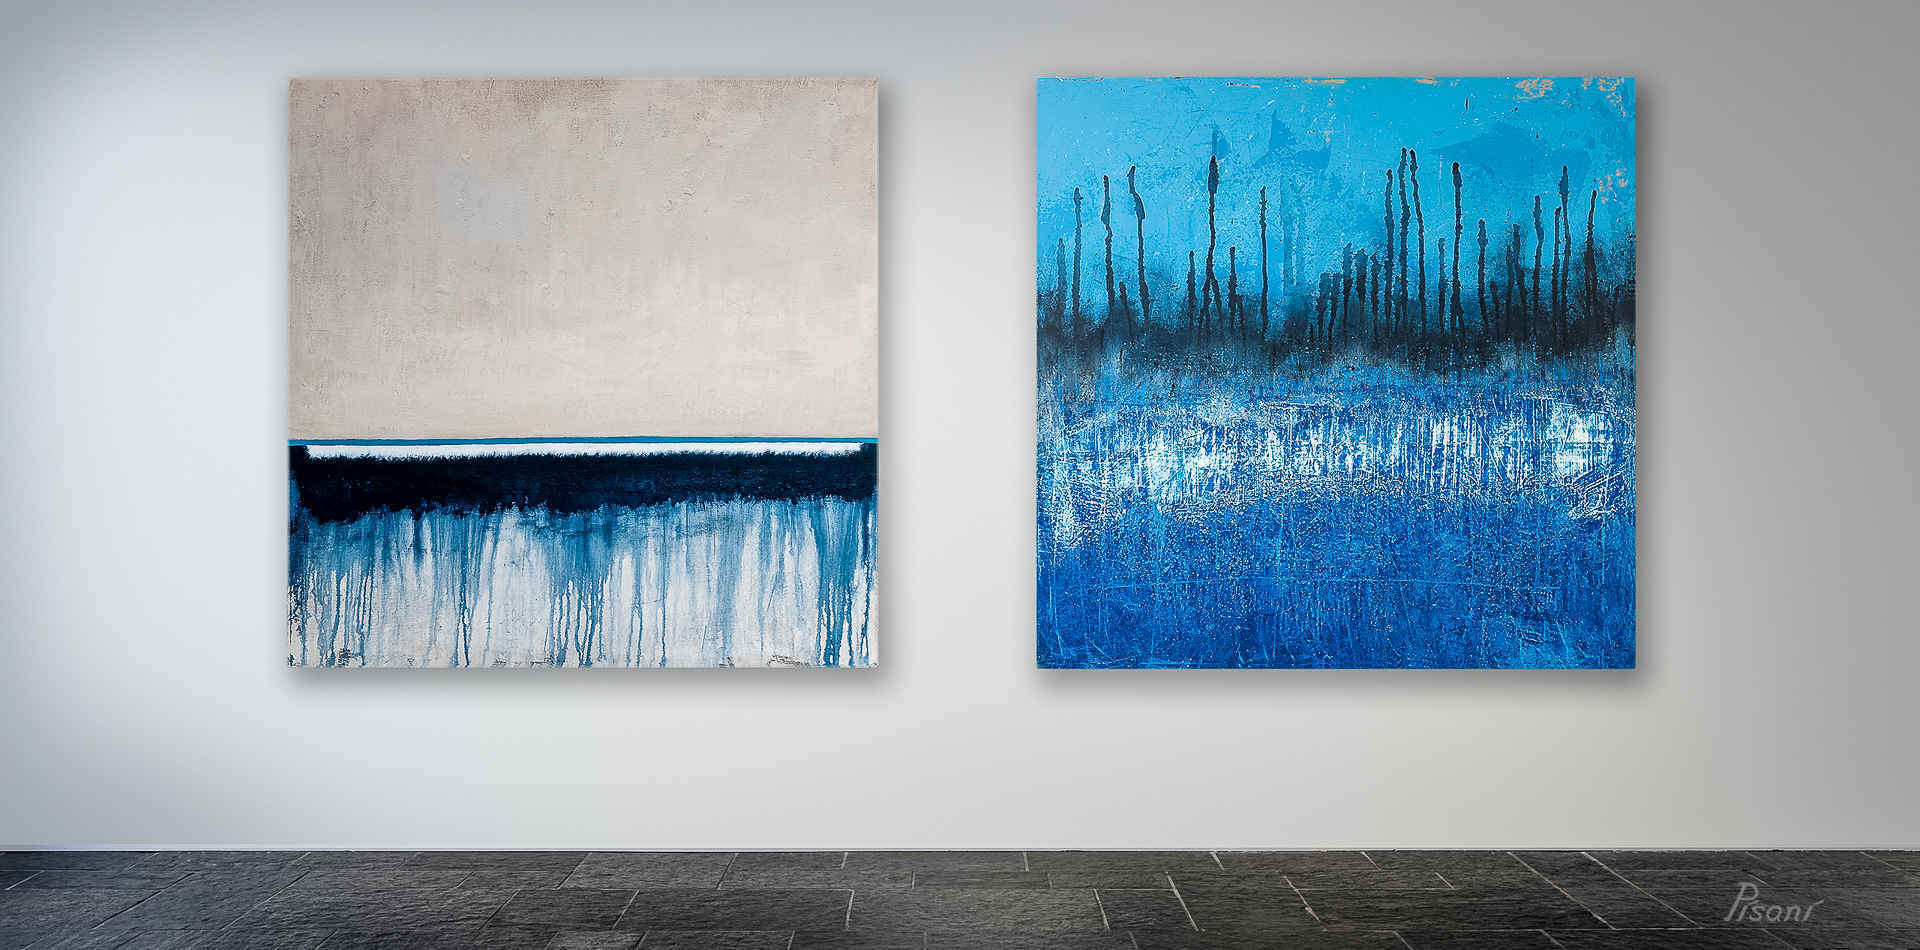 Gallery view of two abstract landscape paintings by contemporary artist Joseph Pisani